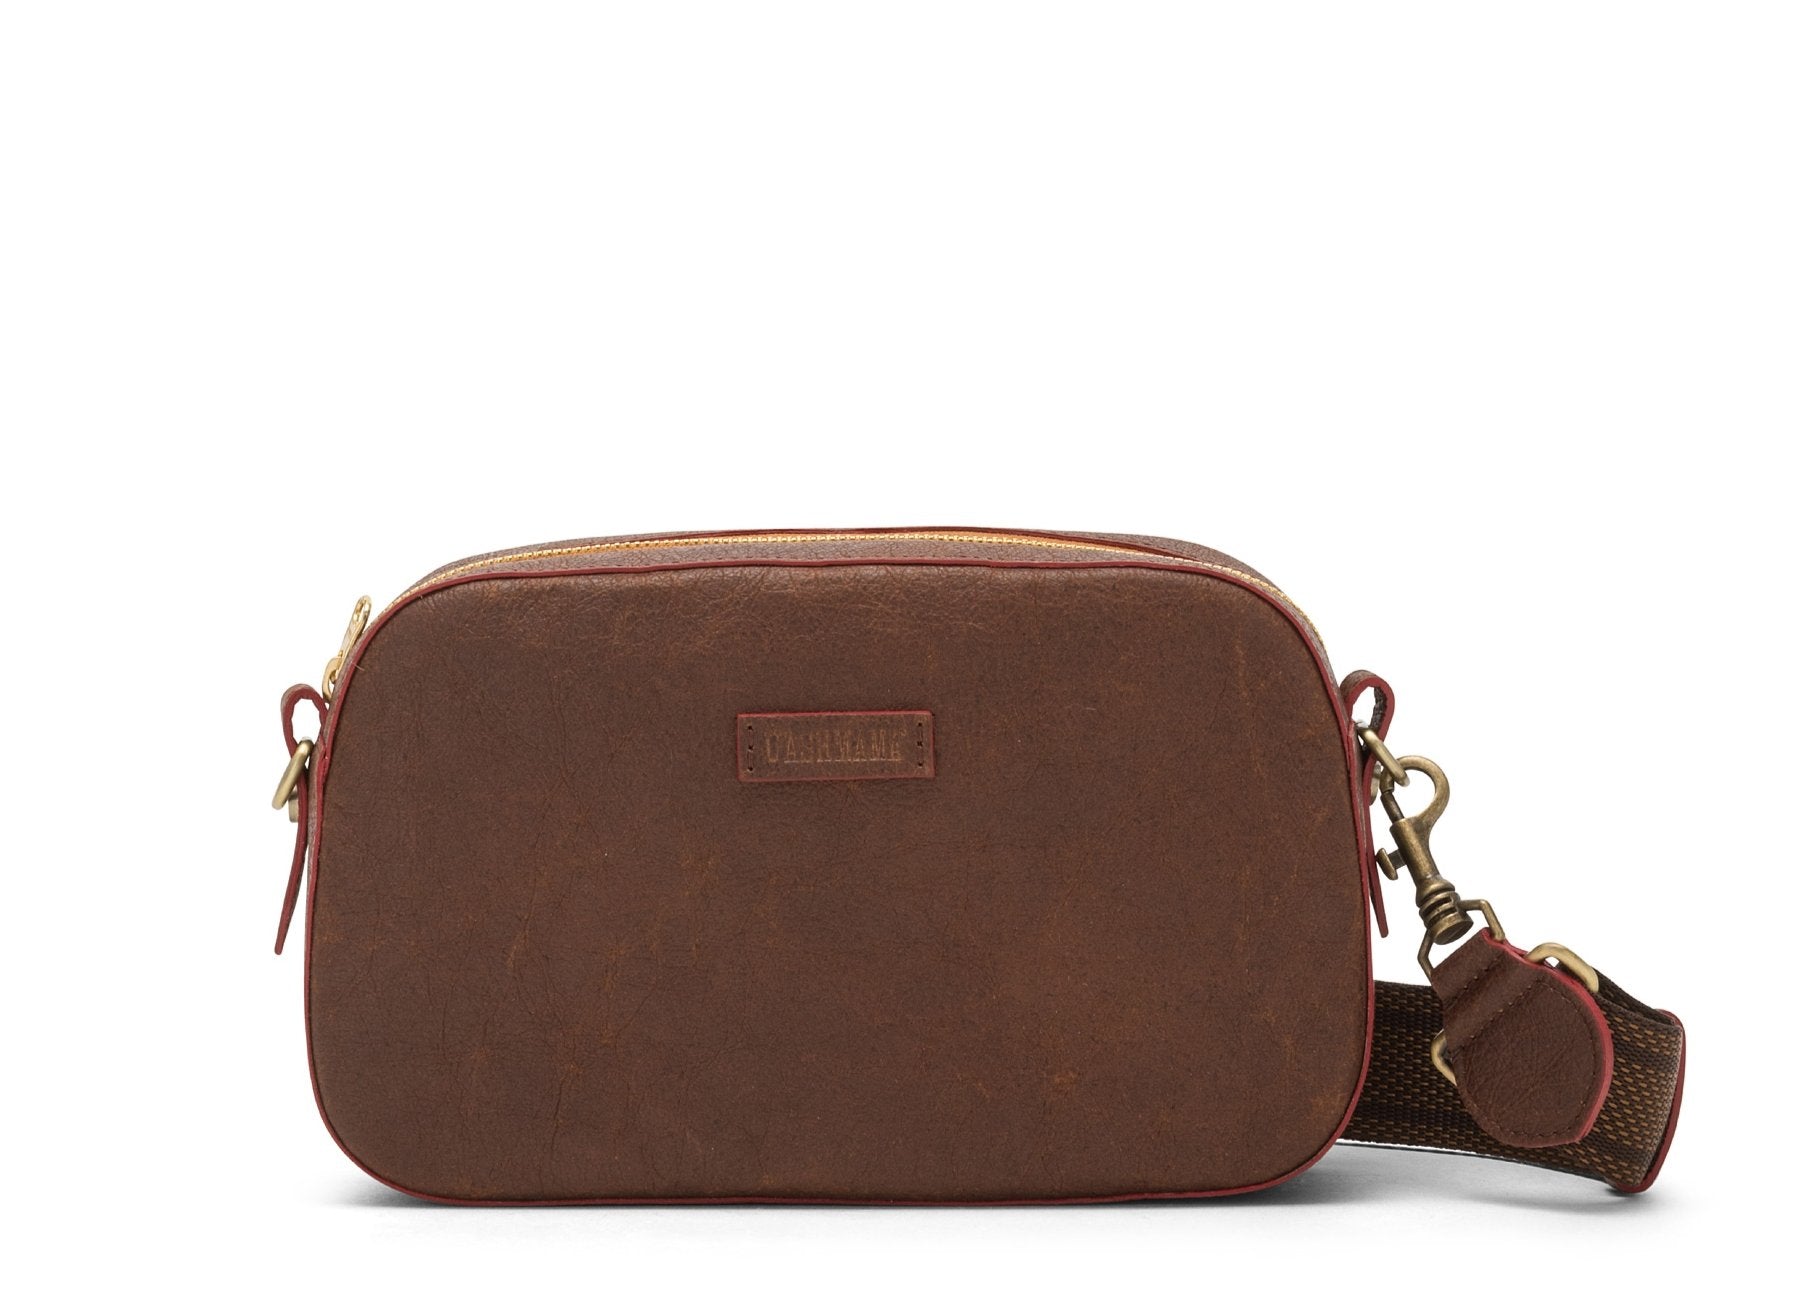 A washable paper cross-body bag is shown with a front tab bearing the UASHMAMA logo in a small font. The bag is shown in brown, with a chocolate toned cotton strap with antique brass hardware.